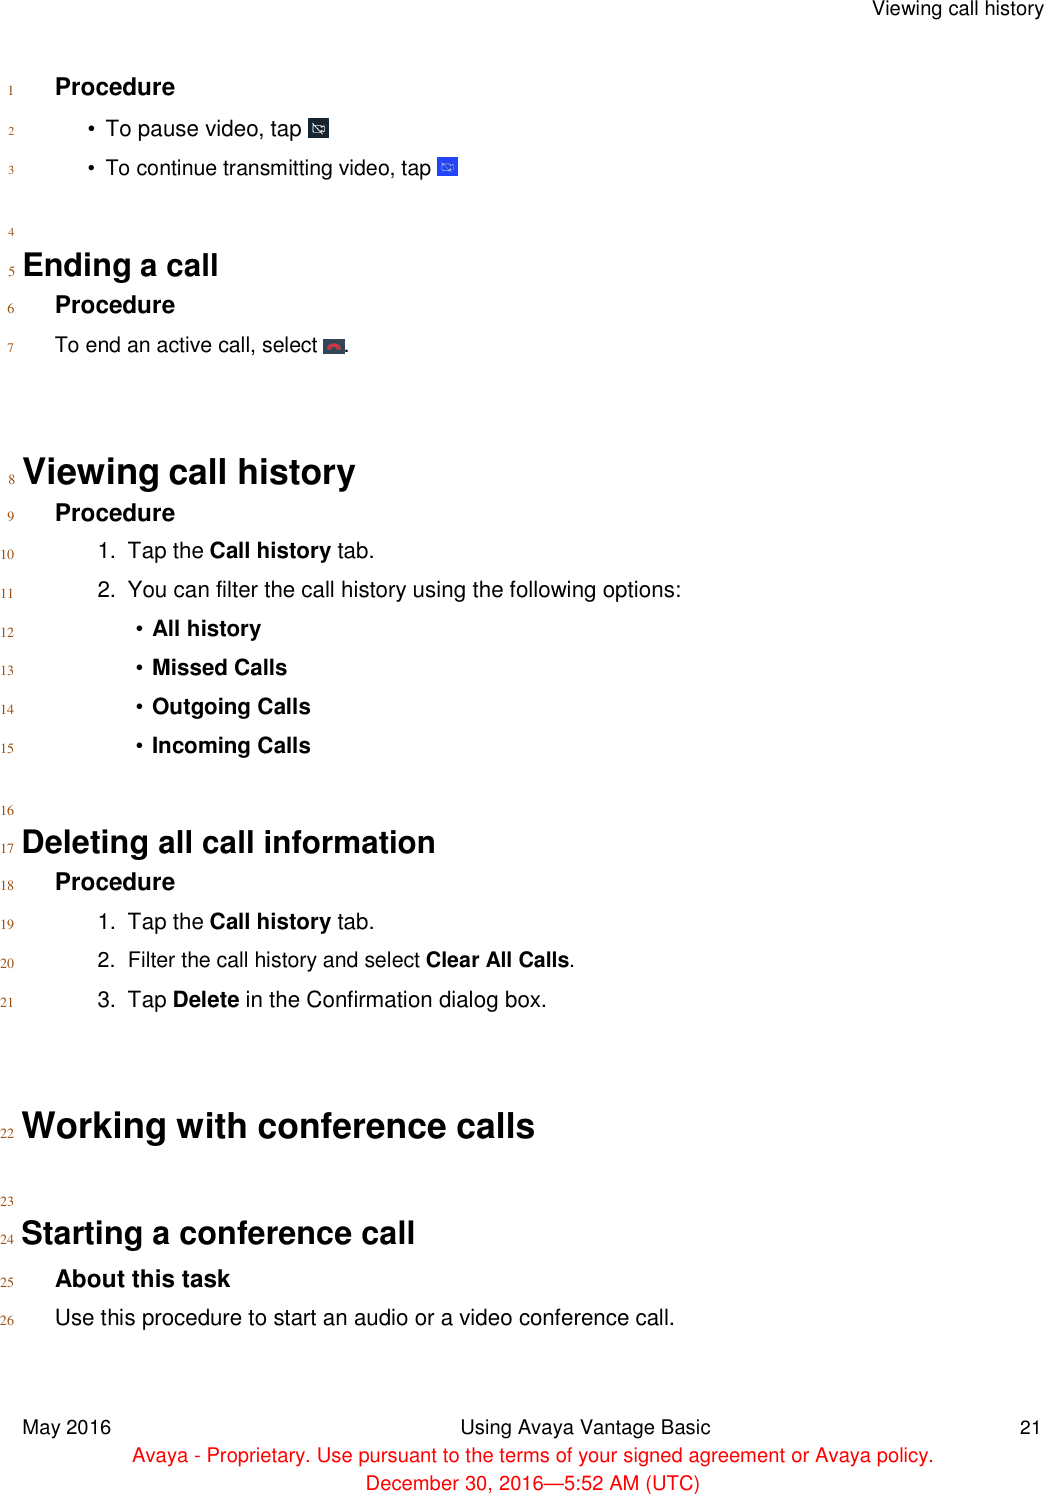   Viewing call history    1 Procedure  2  3   4   •  To pause video, tap    •  To continue transmitting video, tap    5  Ending a call  6 Procedure  7 To end an active call, select  .     8  Viewing call history  9 Procedure  10  11  12  13  14  15   16   1.  Tap the Call history tab.  2.  You can filter the call history using the following options:  • All history  • Missed Calls  • Outgoing Calls  • Incoming Calls  17  Deleting all call information  18 Procedure  19  20  21   1.  Tap the Call history tab.  2.  Filter the call history and select Clear All Calls.  3.  Tap Delete in the Confirmation dialog box.     22  Working with conference calls   23  24  Starting a conference call  25 About this task  26 Use this procedure to start an audio or a video conference call.     May 2016 Using Avaya Vantage Basic 21  Avaya - Proprietary. Use pursuant to the terms of your signed agreement or Avaya policy.  December 30, 2016—5:52 AM (UTC) 